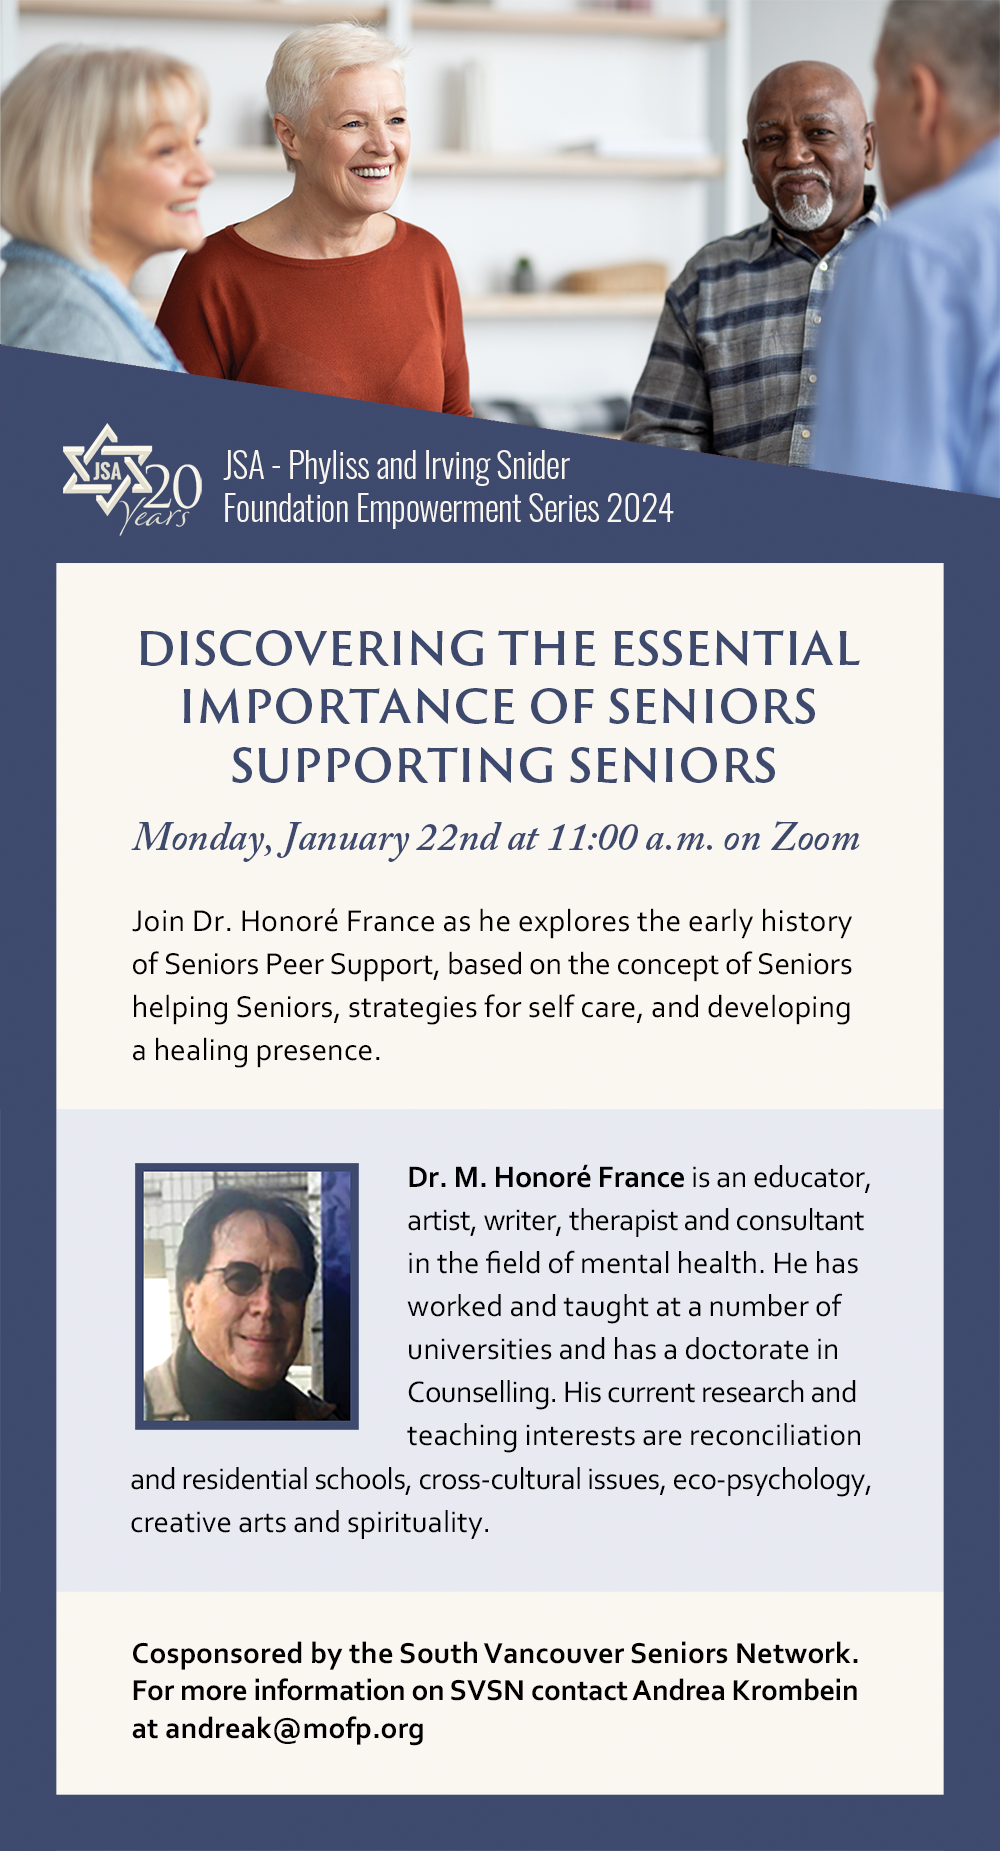 JSA-Phyliss and Irving Snider Foundation Empowerment Series: Discovering the Essential Importance of Seniors Supporting Seniors @ Zoom